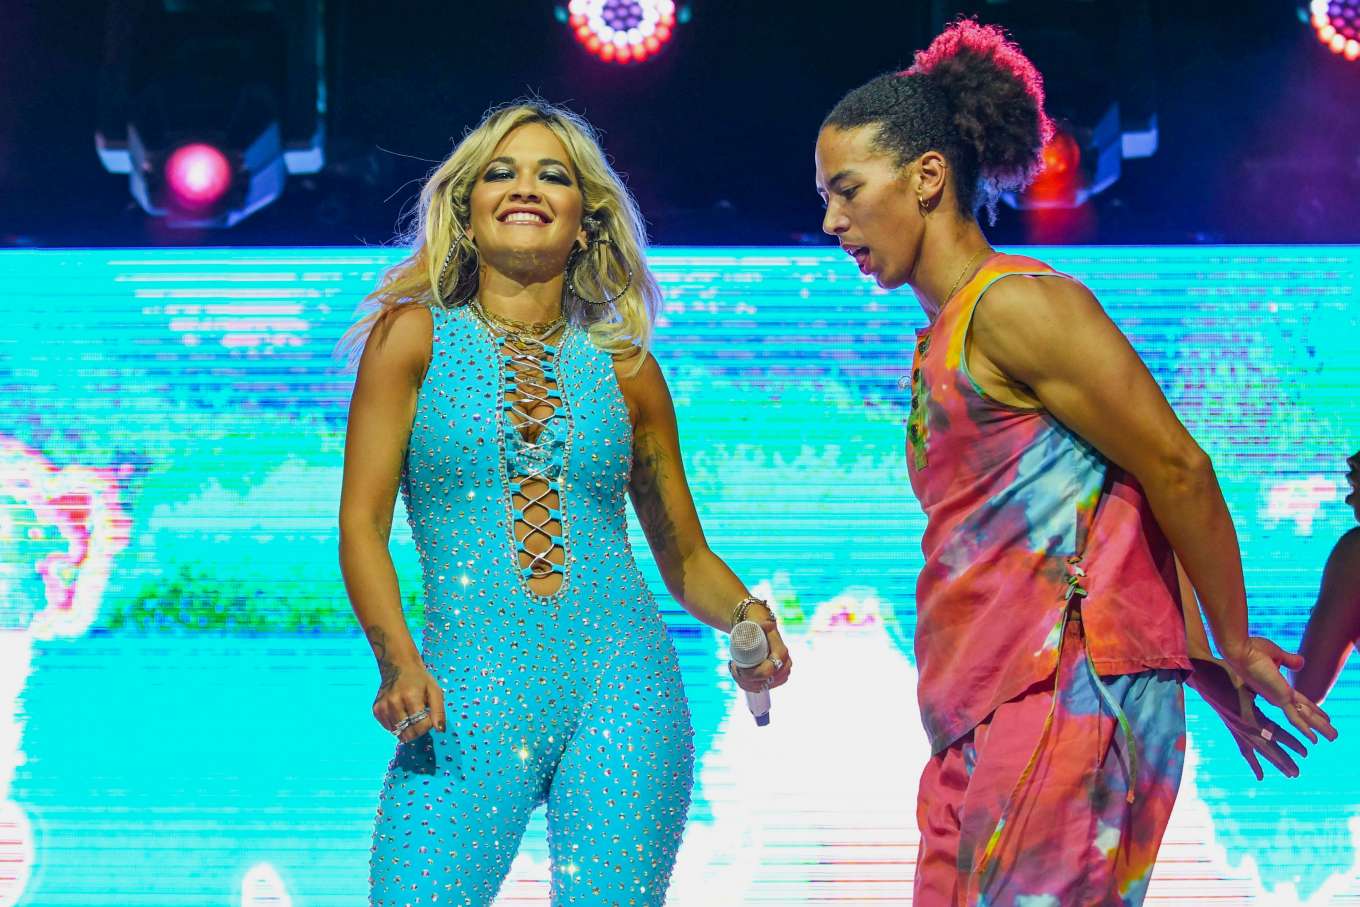 Rita Ora â€“ Performing Live After Racing at Doncaster Racecourse in London